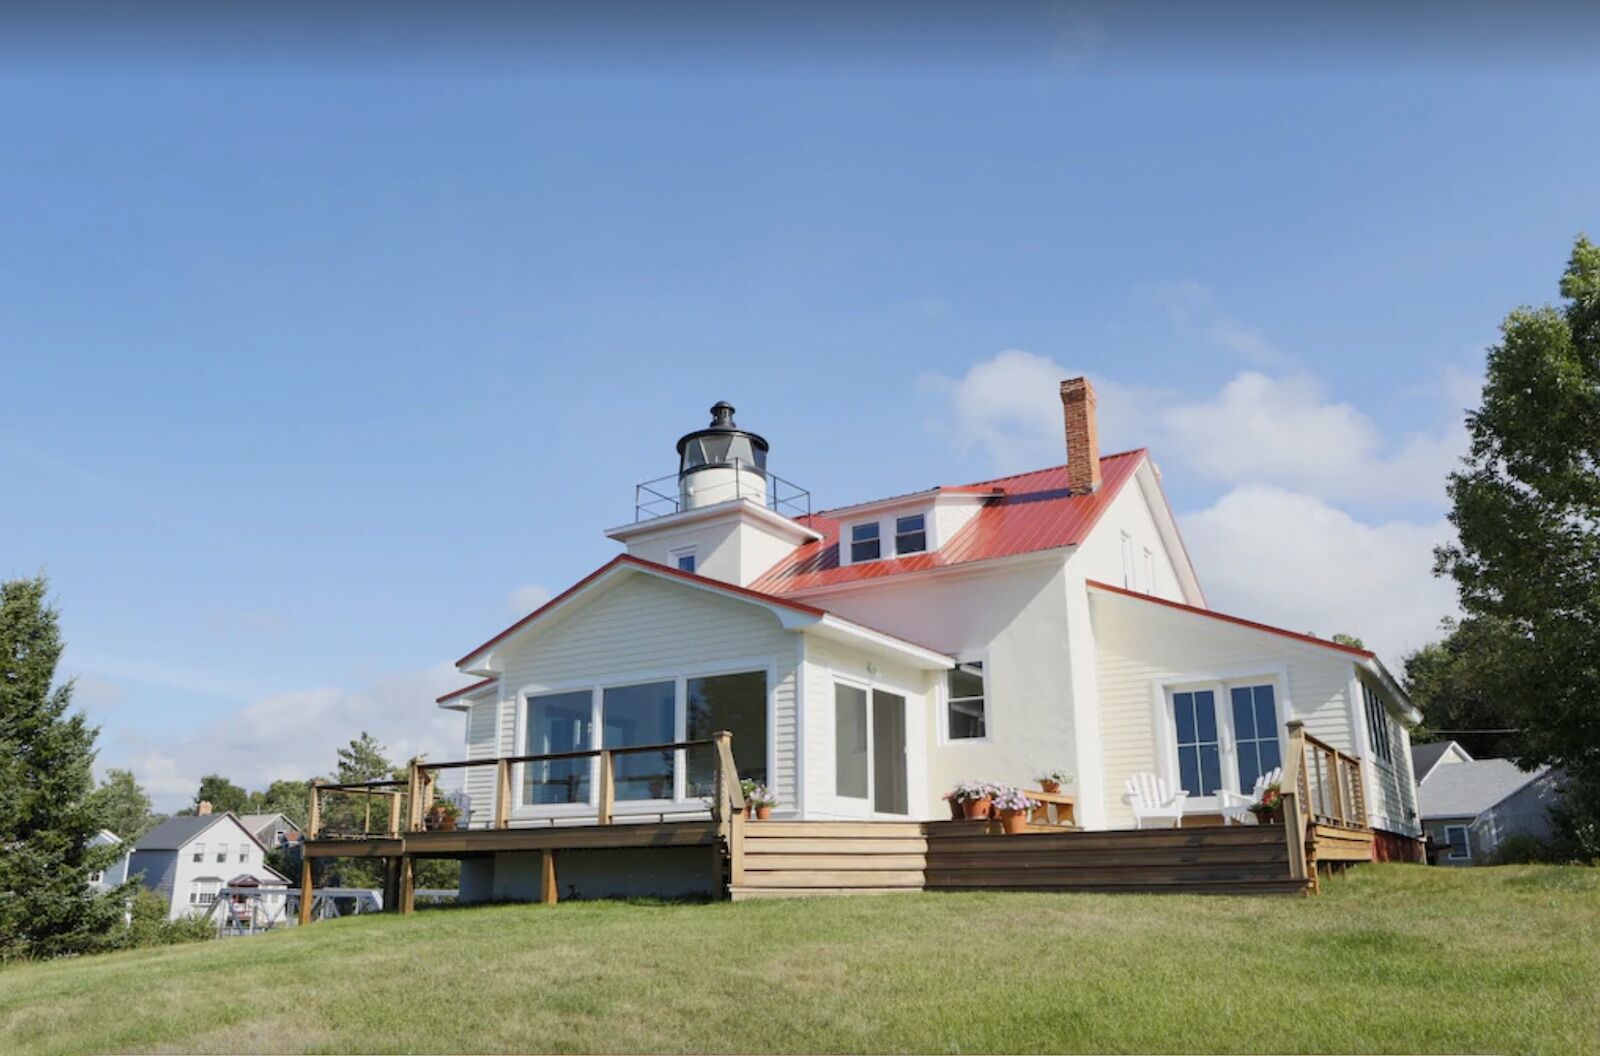 Eagle River Lighthouse is one of the few Michigan lighthouses you can stay at